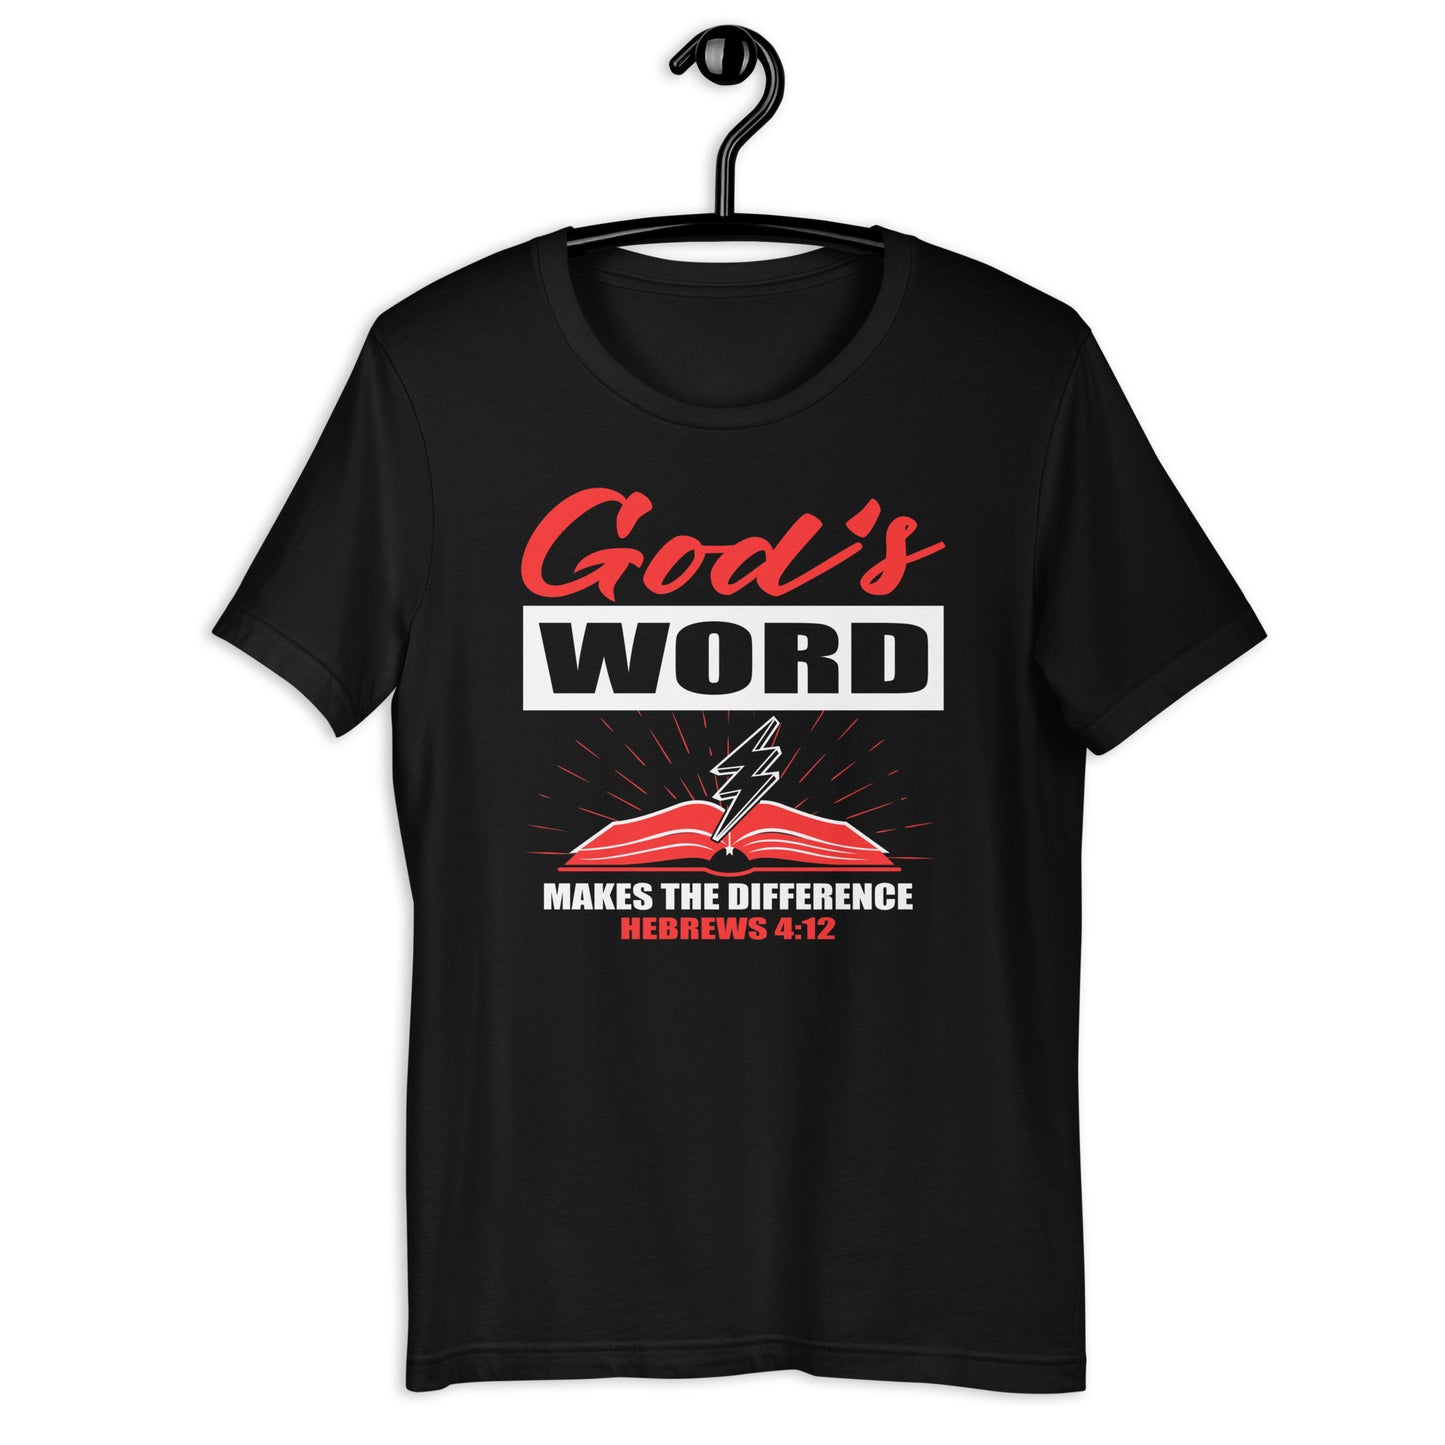 God’s Word Makes the Difference T-Shirt